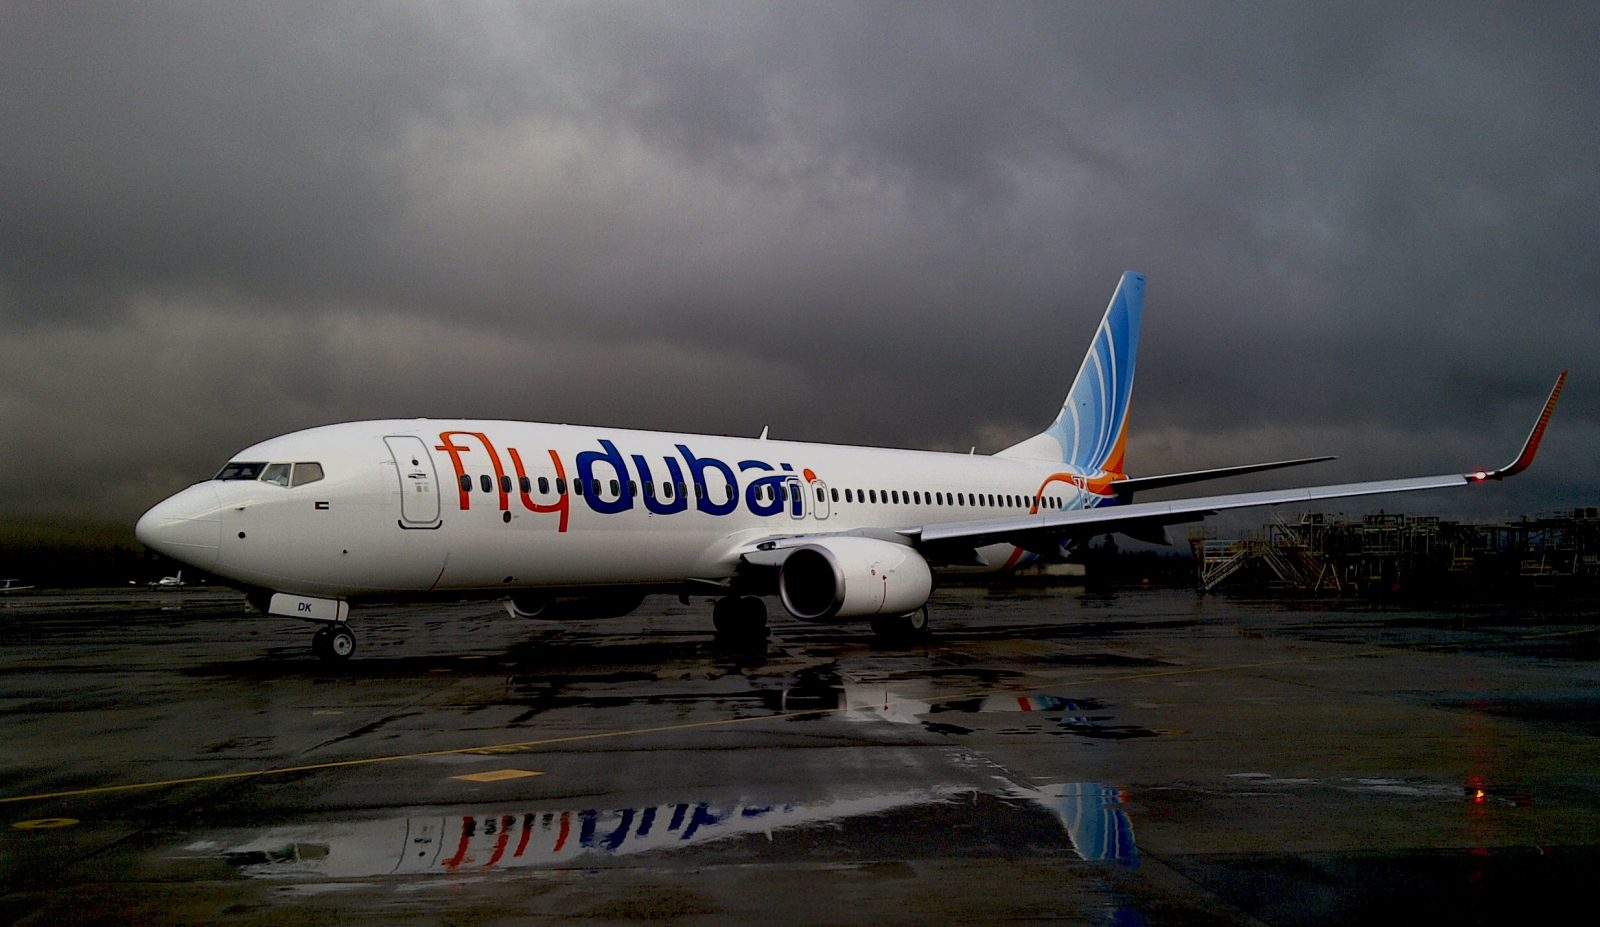 flydubai Official: Pilots Involved in Recent Moscow Sheremetyevo Incident Were NOT Fatigued